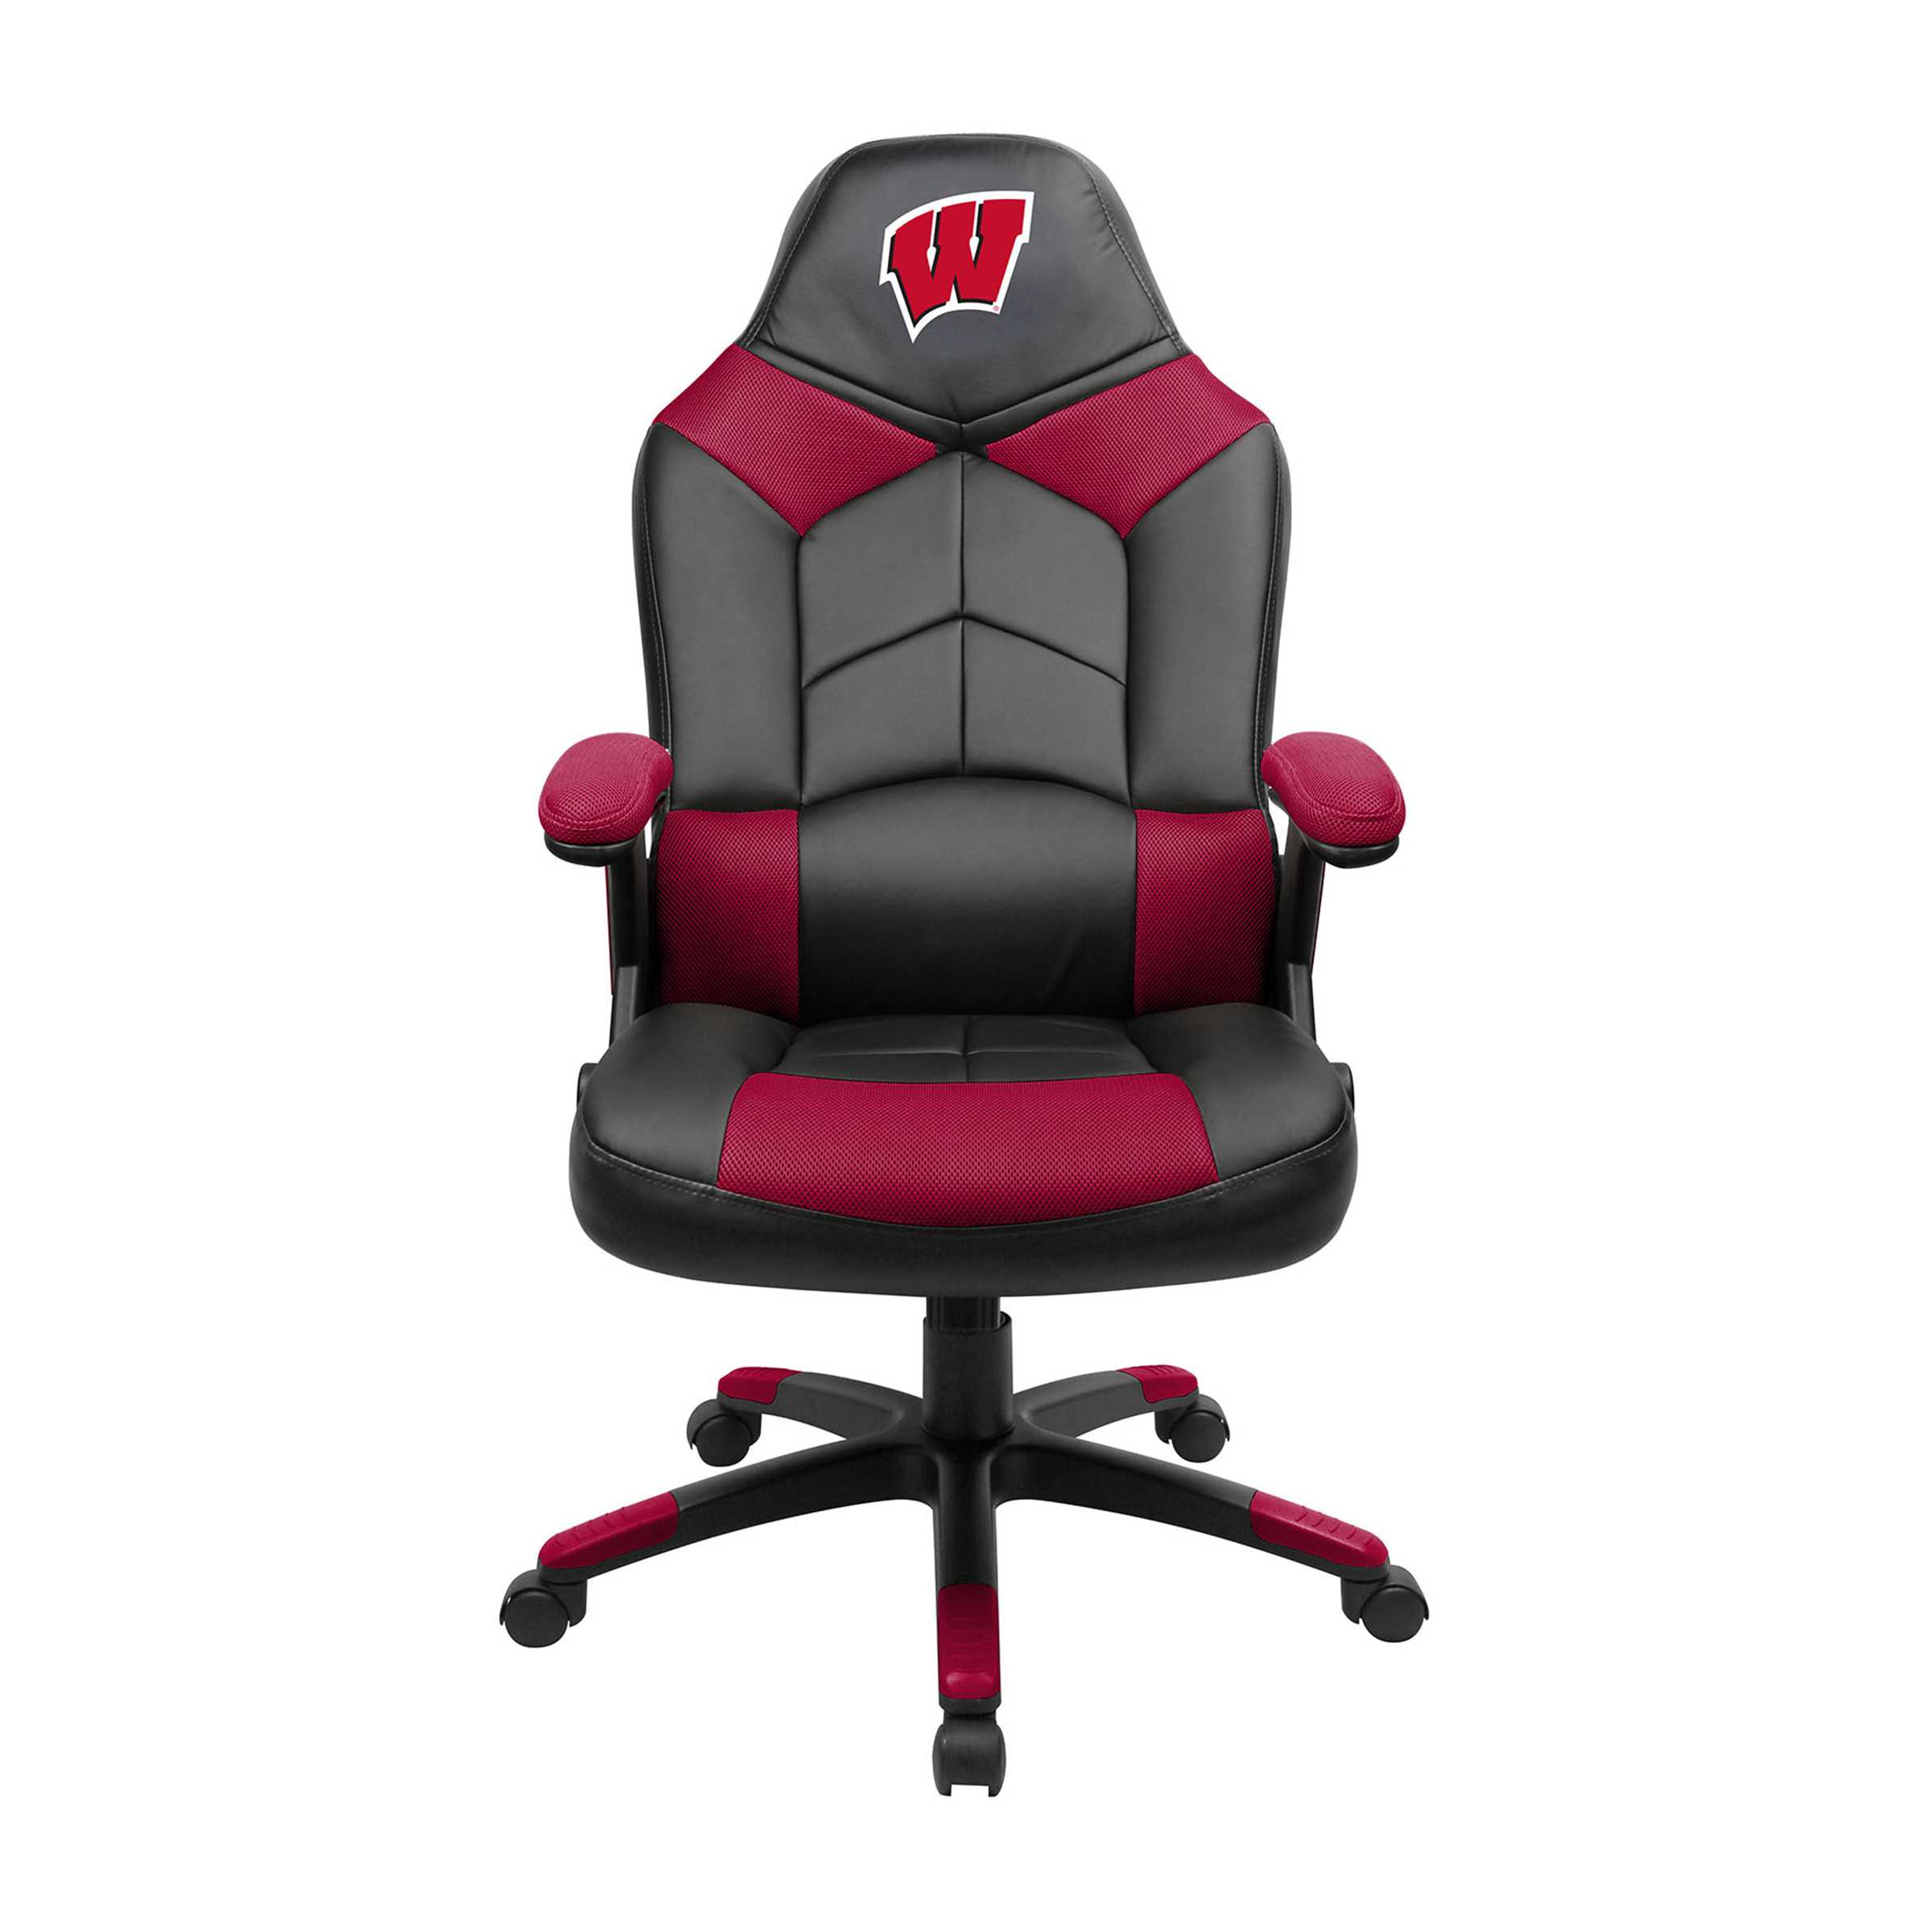 UNIVERSITY OF WISCONSIN OVERSIZED GAMING CHAIR